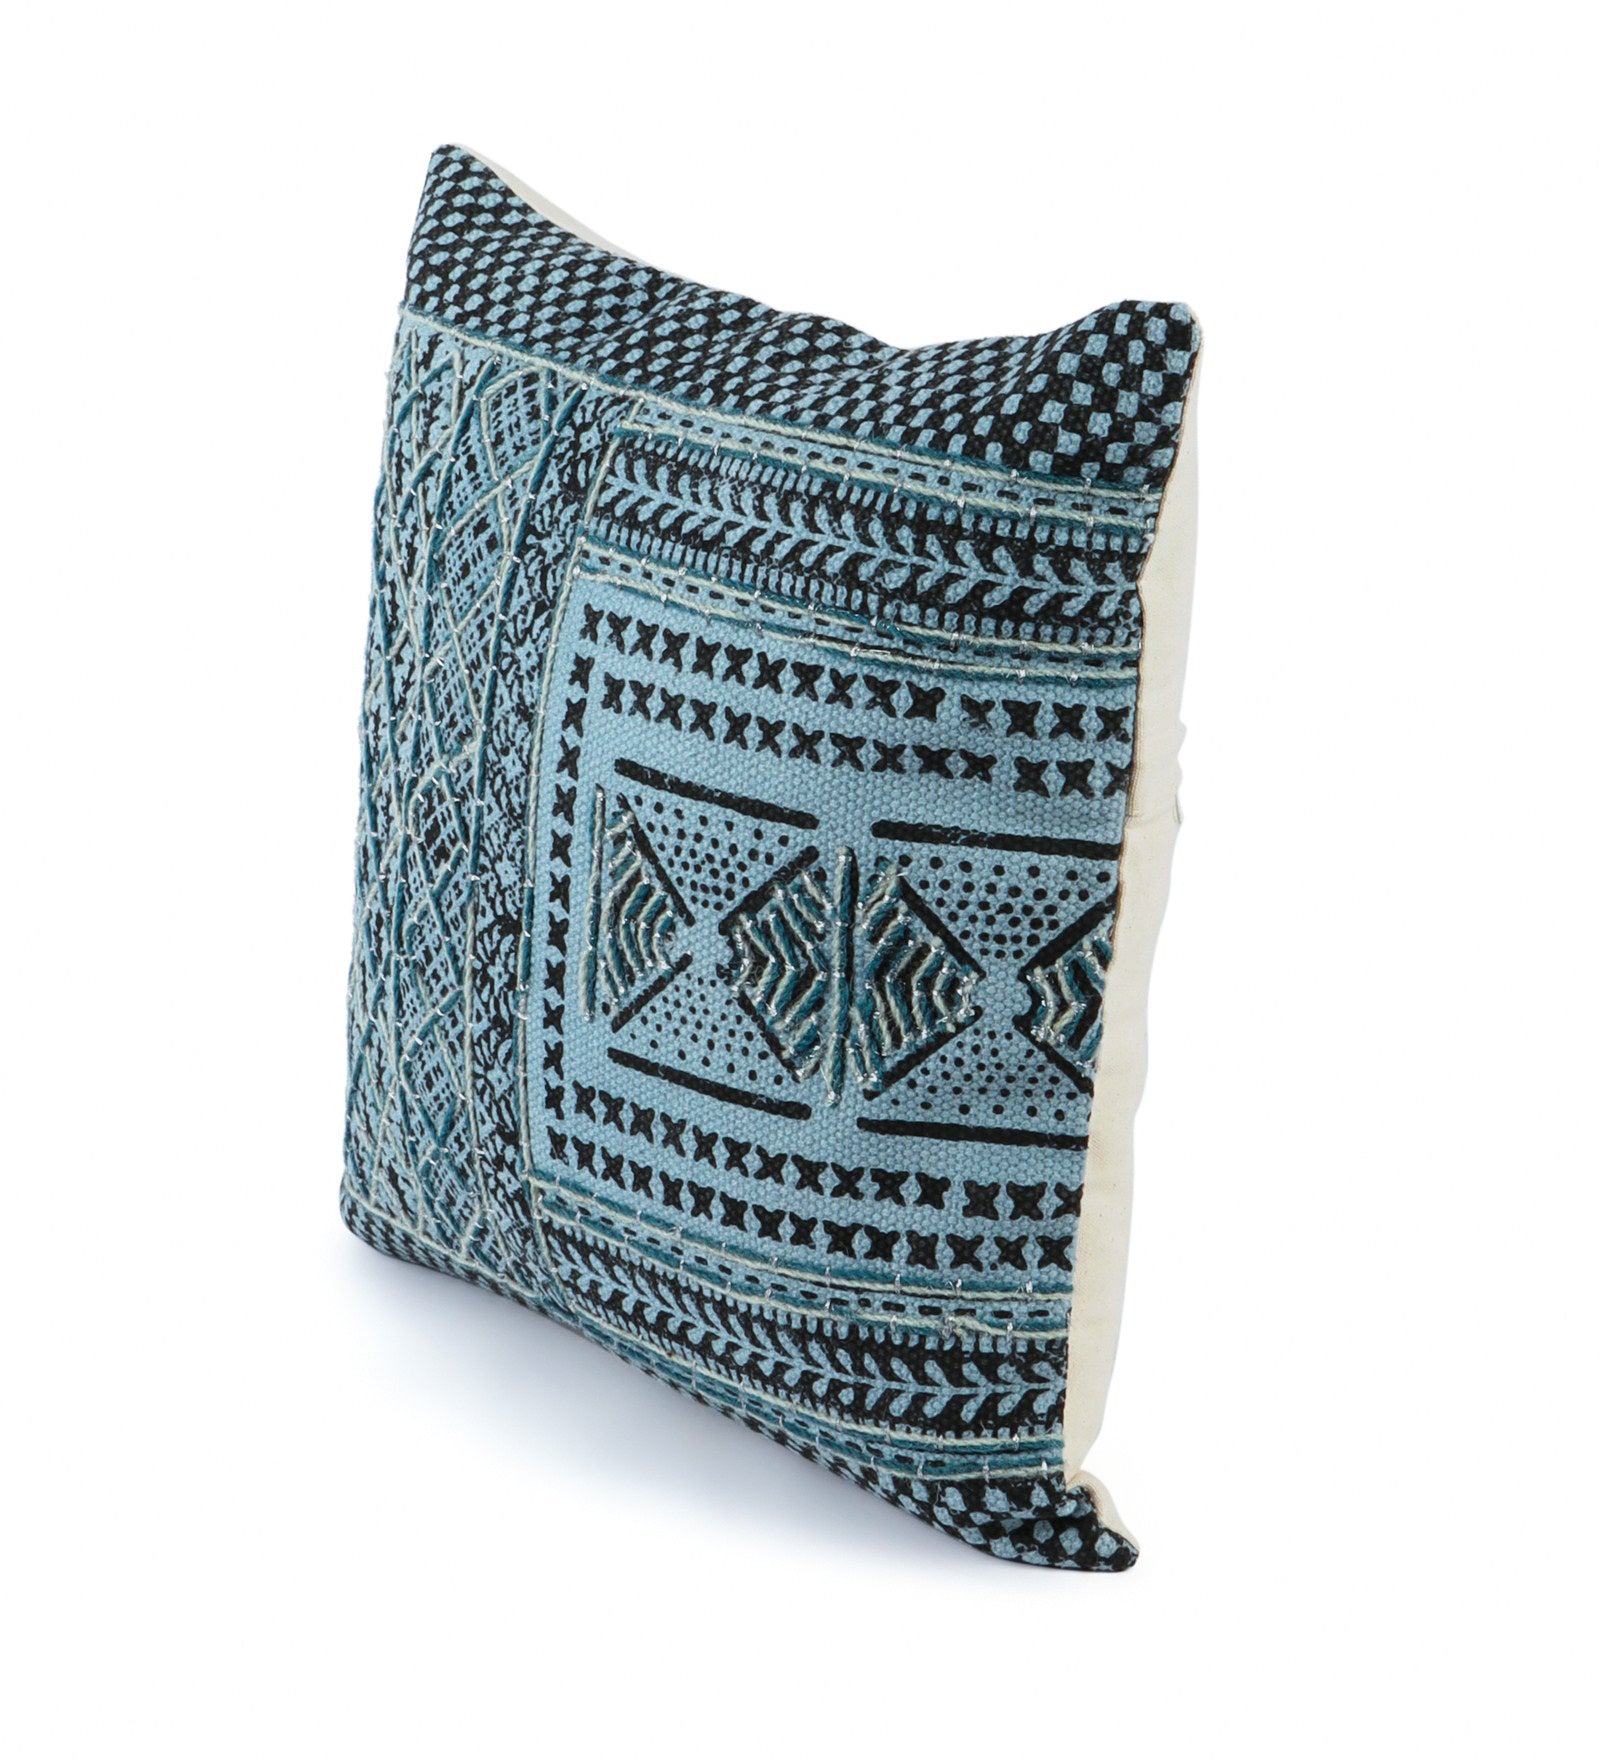 Embroidered Contemporary Cushion Cover (Blue Check Design)